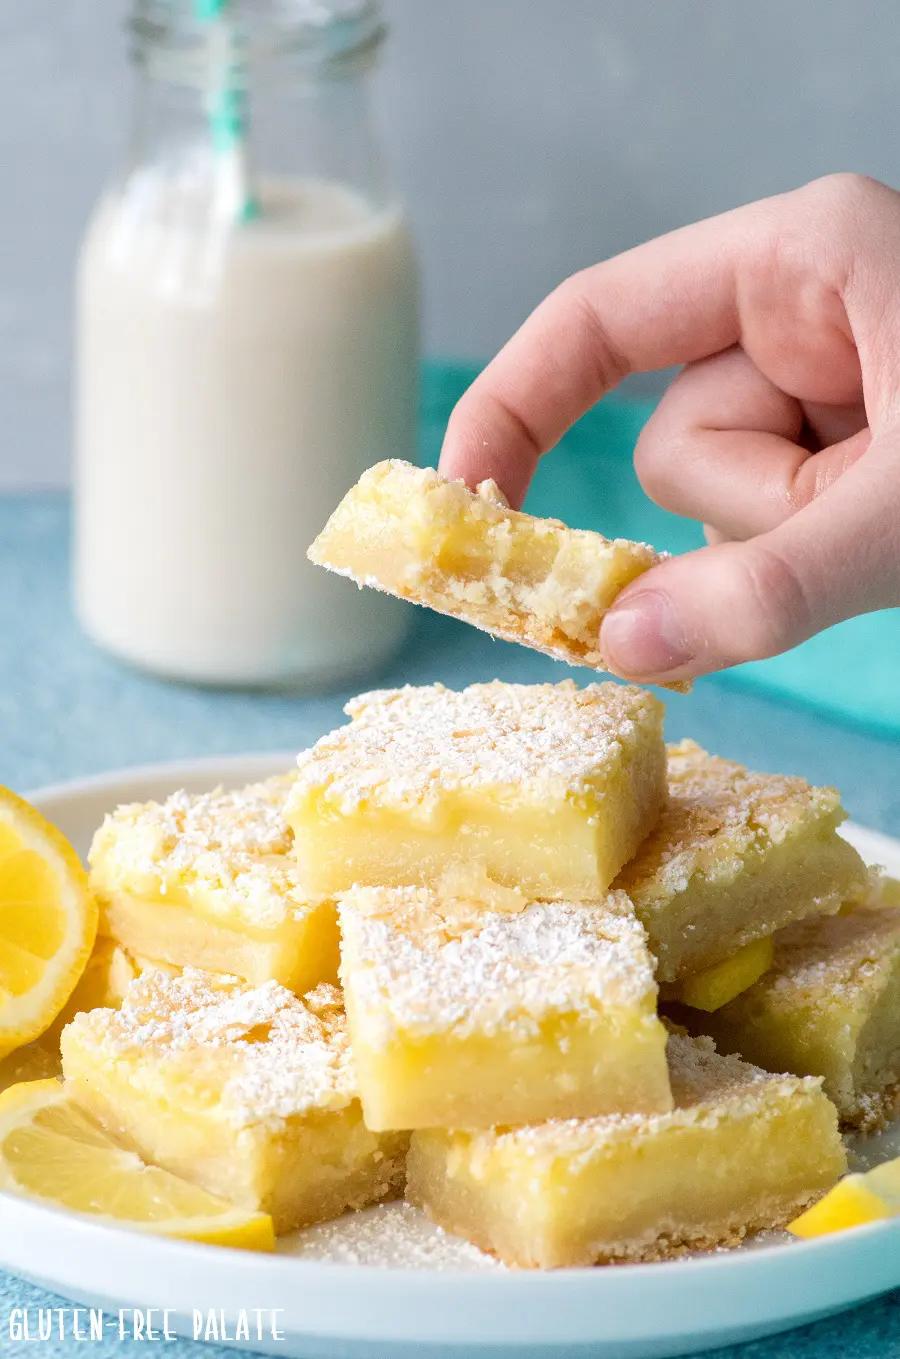 a hand holding a gluten-free lemon bars with a bite out, over a plate of lemon bars